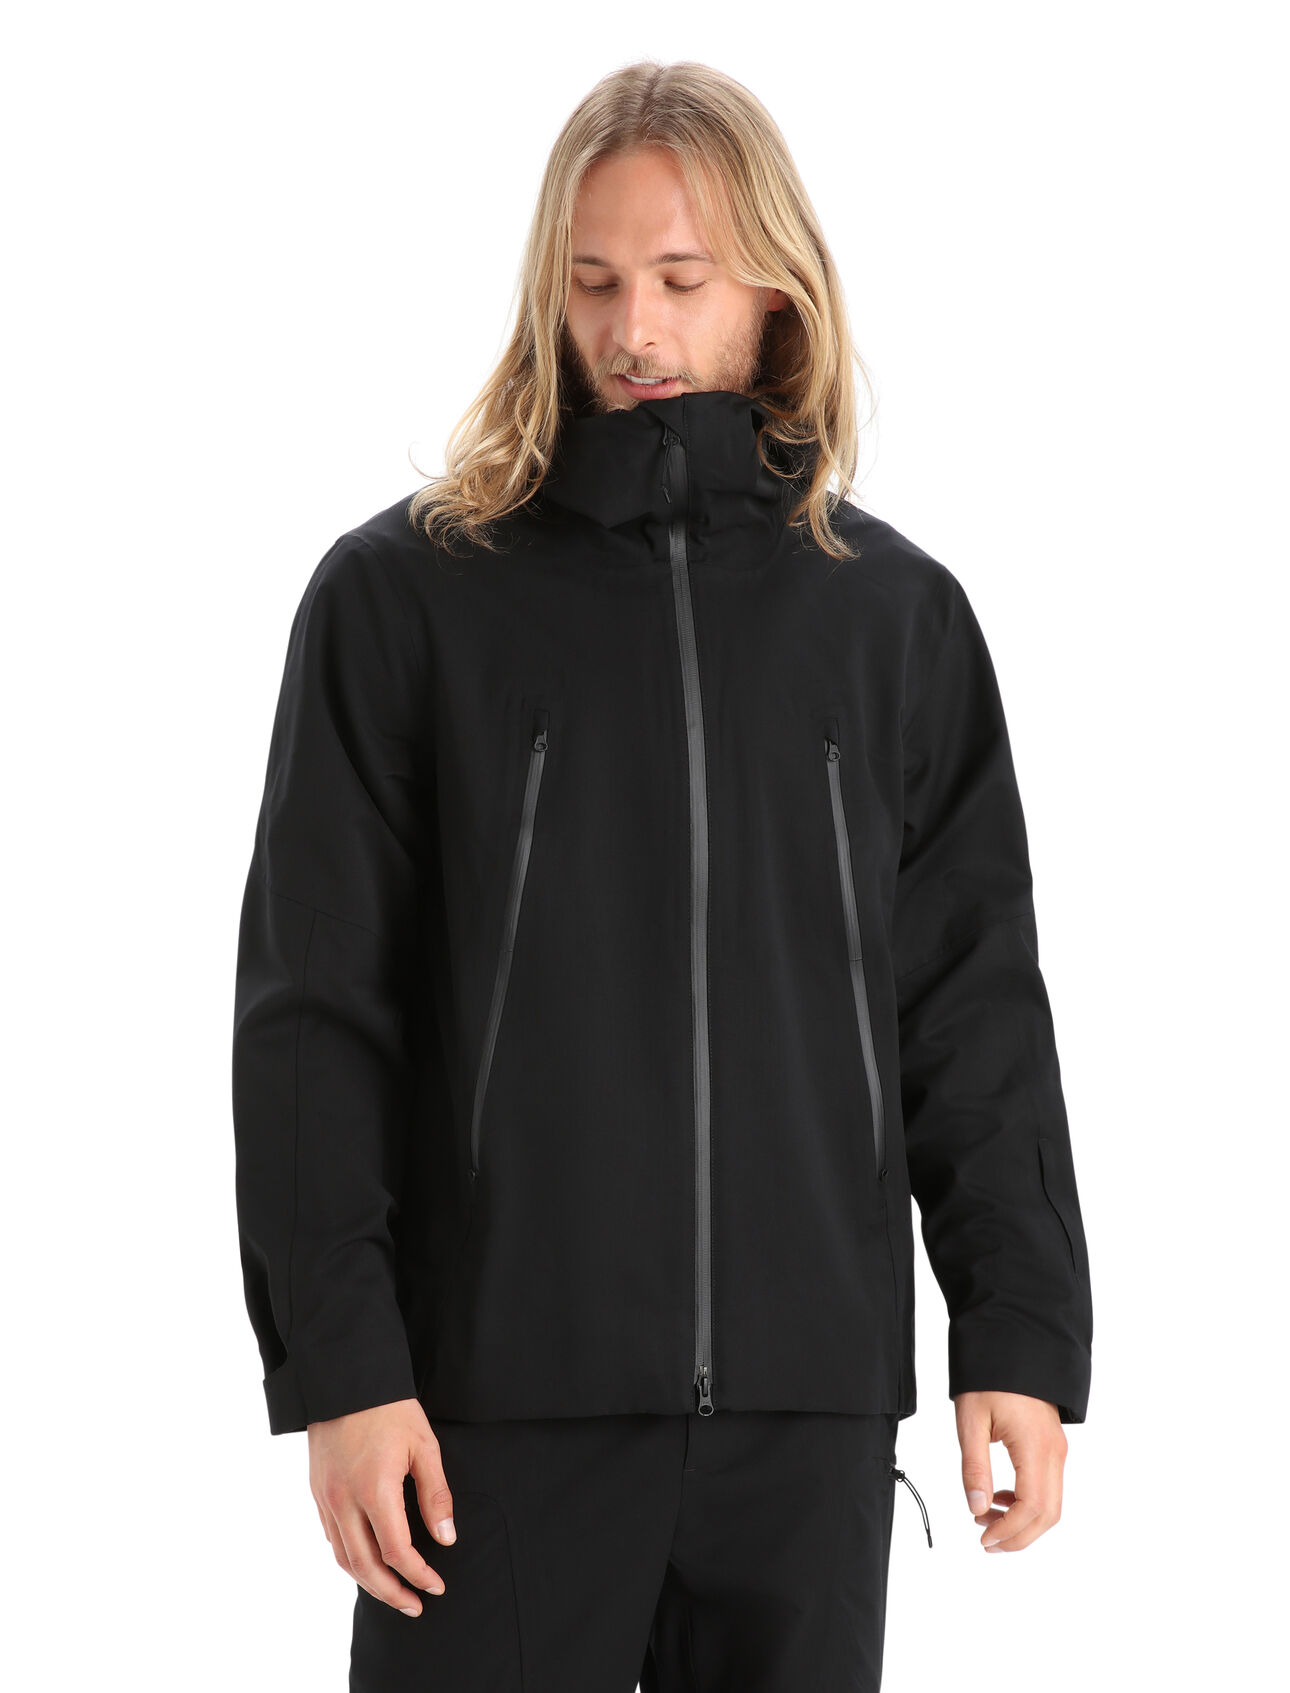 Mens Shell+™ Merino Hooded Jacket An ultra-versatile, highly weather resistant shell jacket made with 100% pure merino wool, the Shell+™ Hooded Jacket features a durable, PFC-free water-repellent finish to keep you warm and dry in changing conditions.